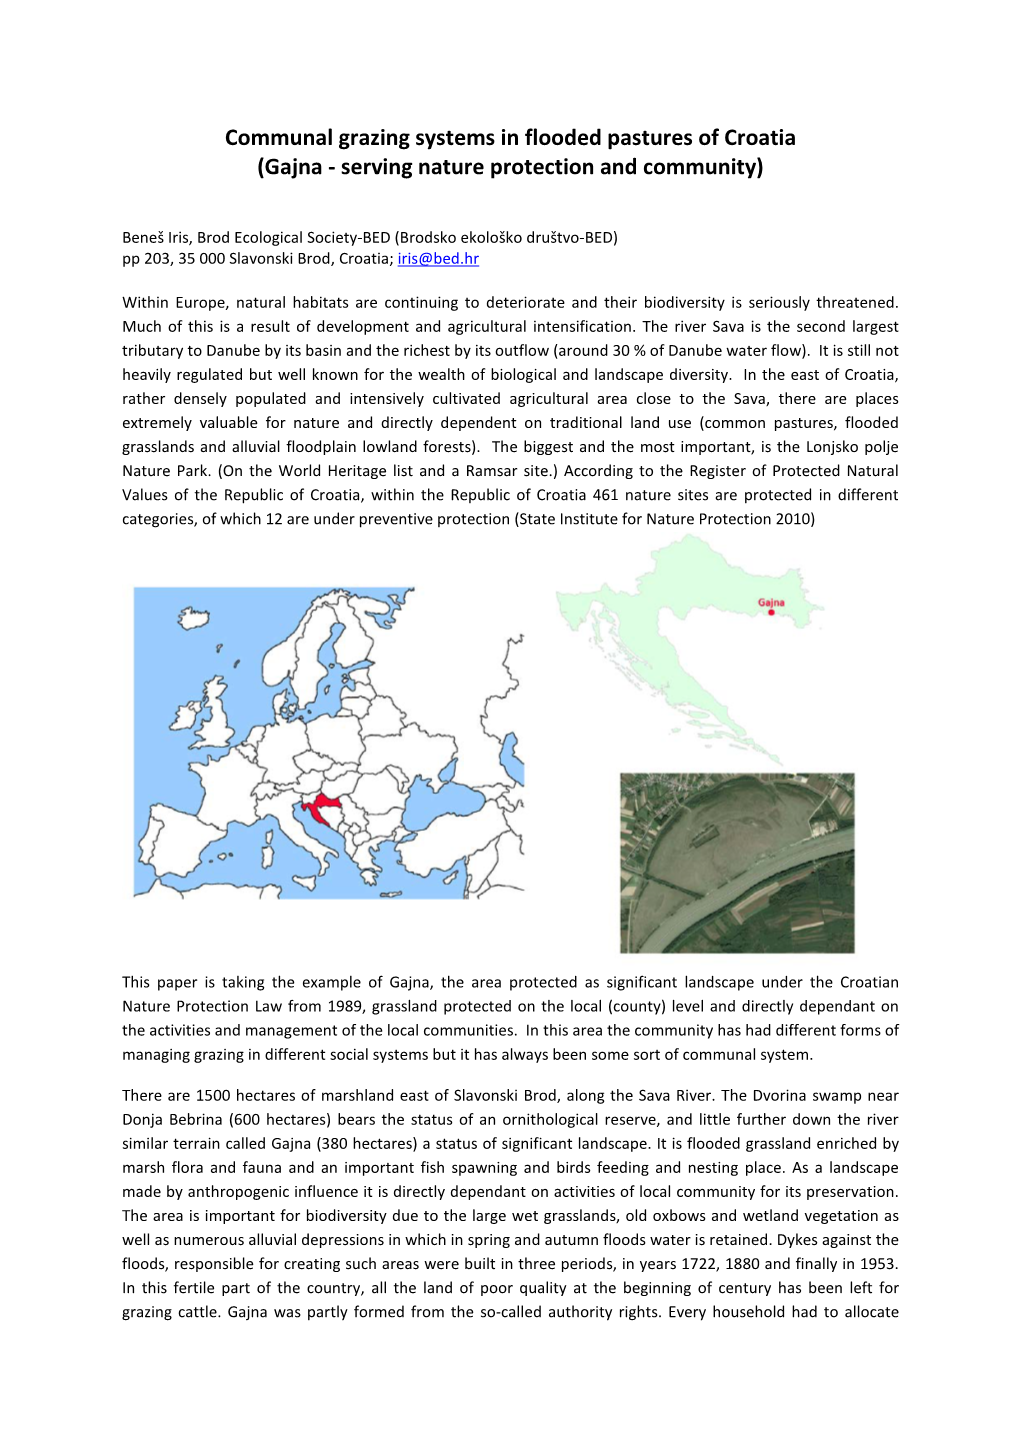 Communal Grazing Systems in Flooded Pastures of Croatia (Gajna - Serving Nature Protection and Community)